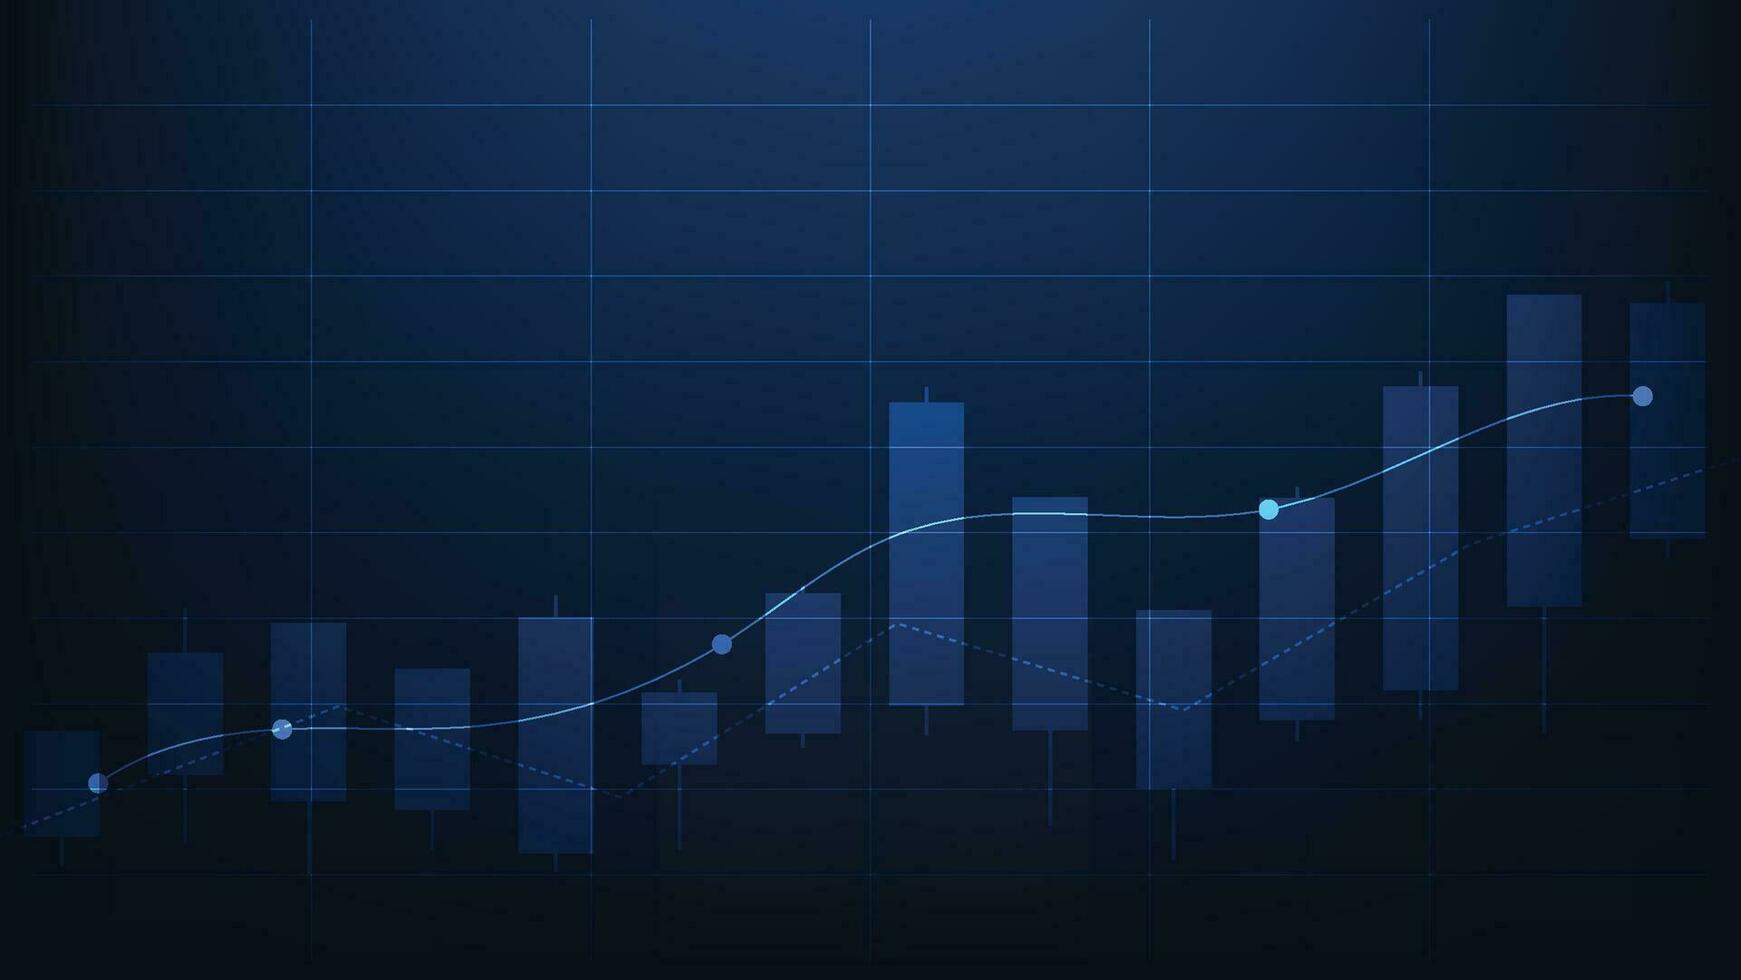 finance background with stock market statistic trend with candlesticks and bar chart vector